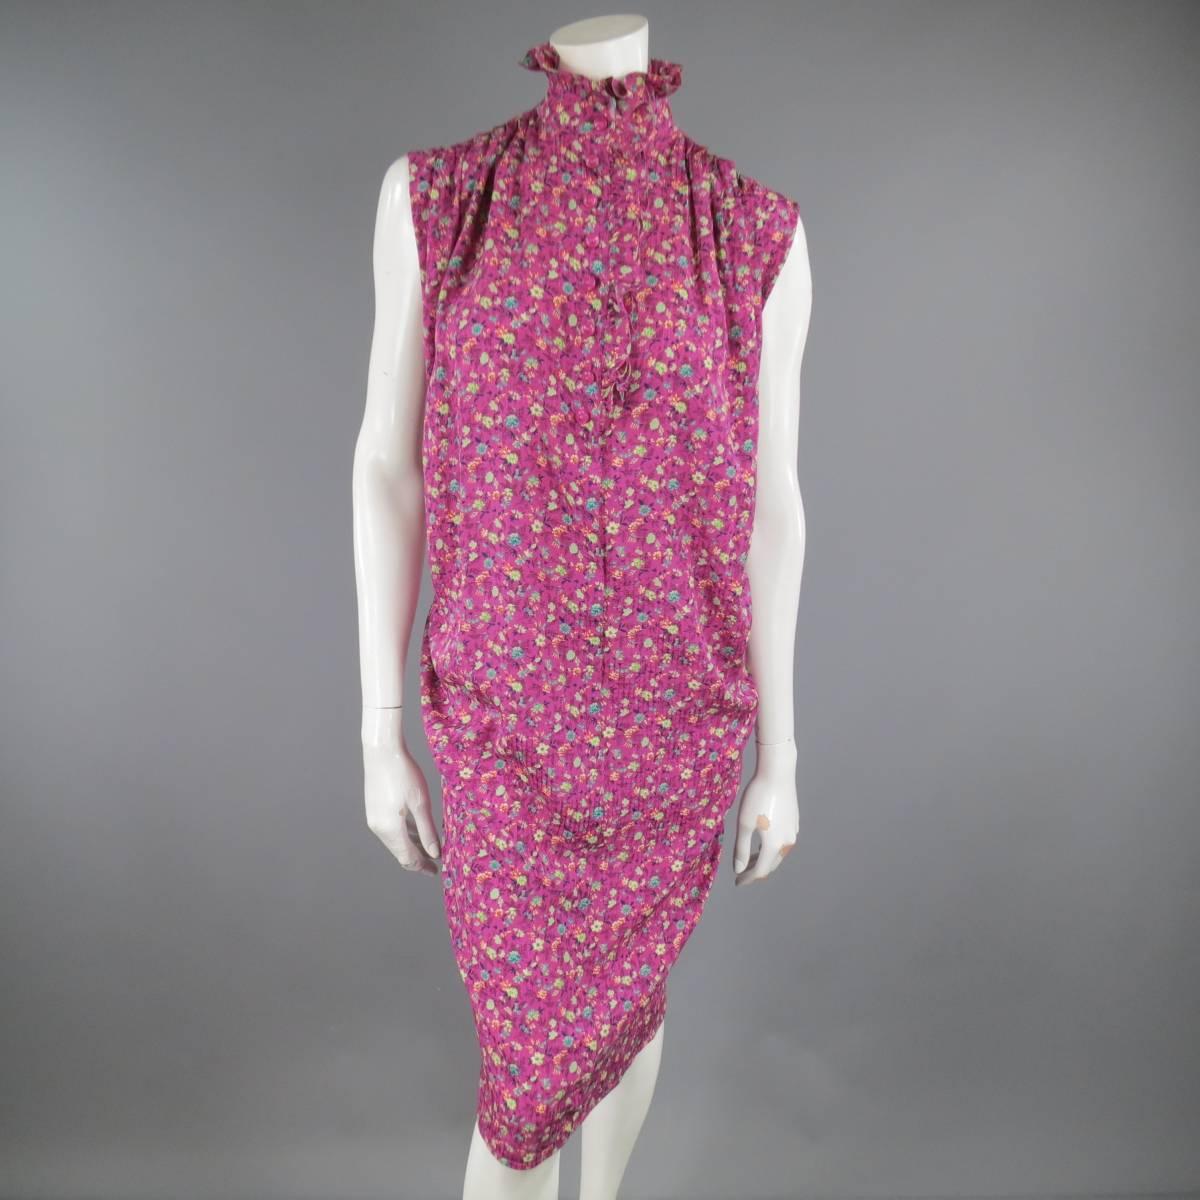 This fabulous vintage EMANUEL UNGARO dress comes a fuchsia pink floral print silk  and features a high ruffled collar with button closure, pleated shoulders, cacoon shirt silhouette, and includes a yellow floral print sash with hook eye closures for